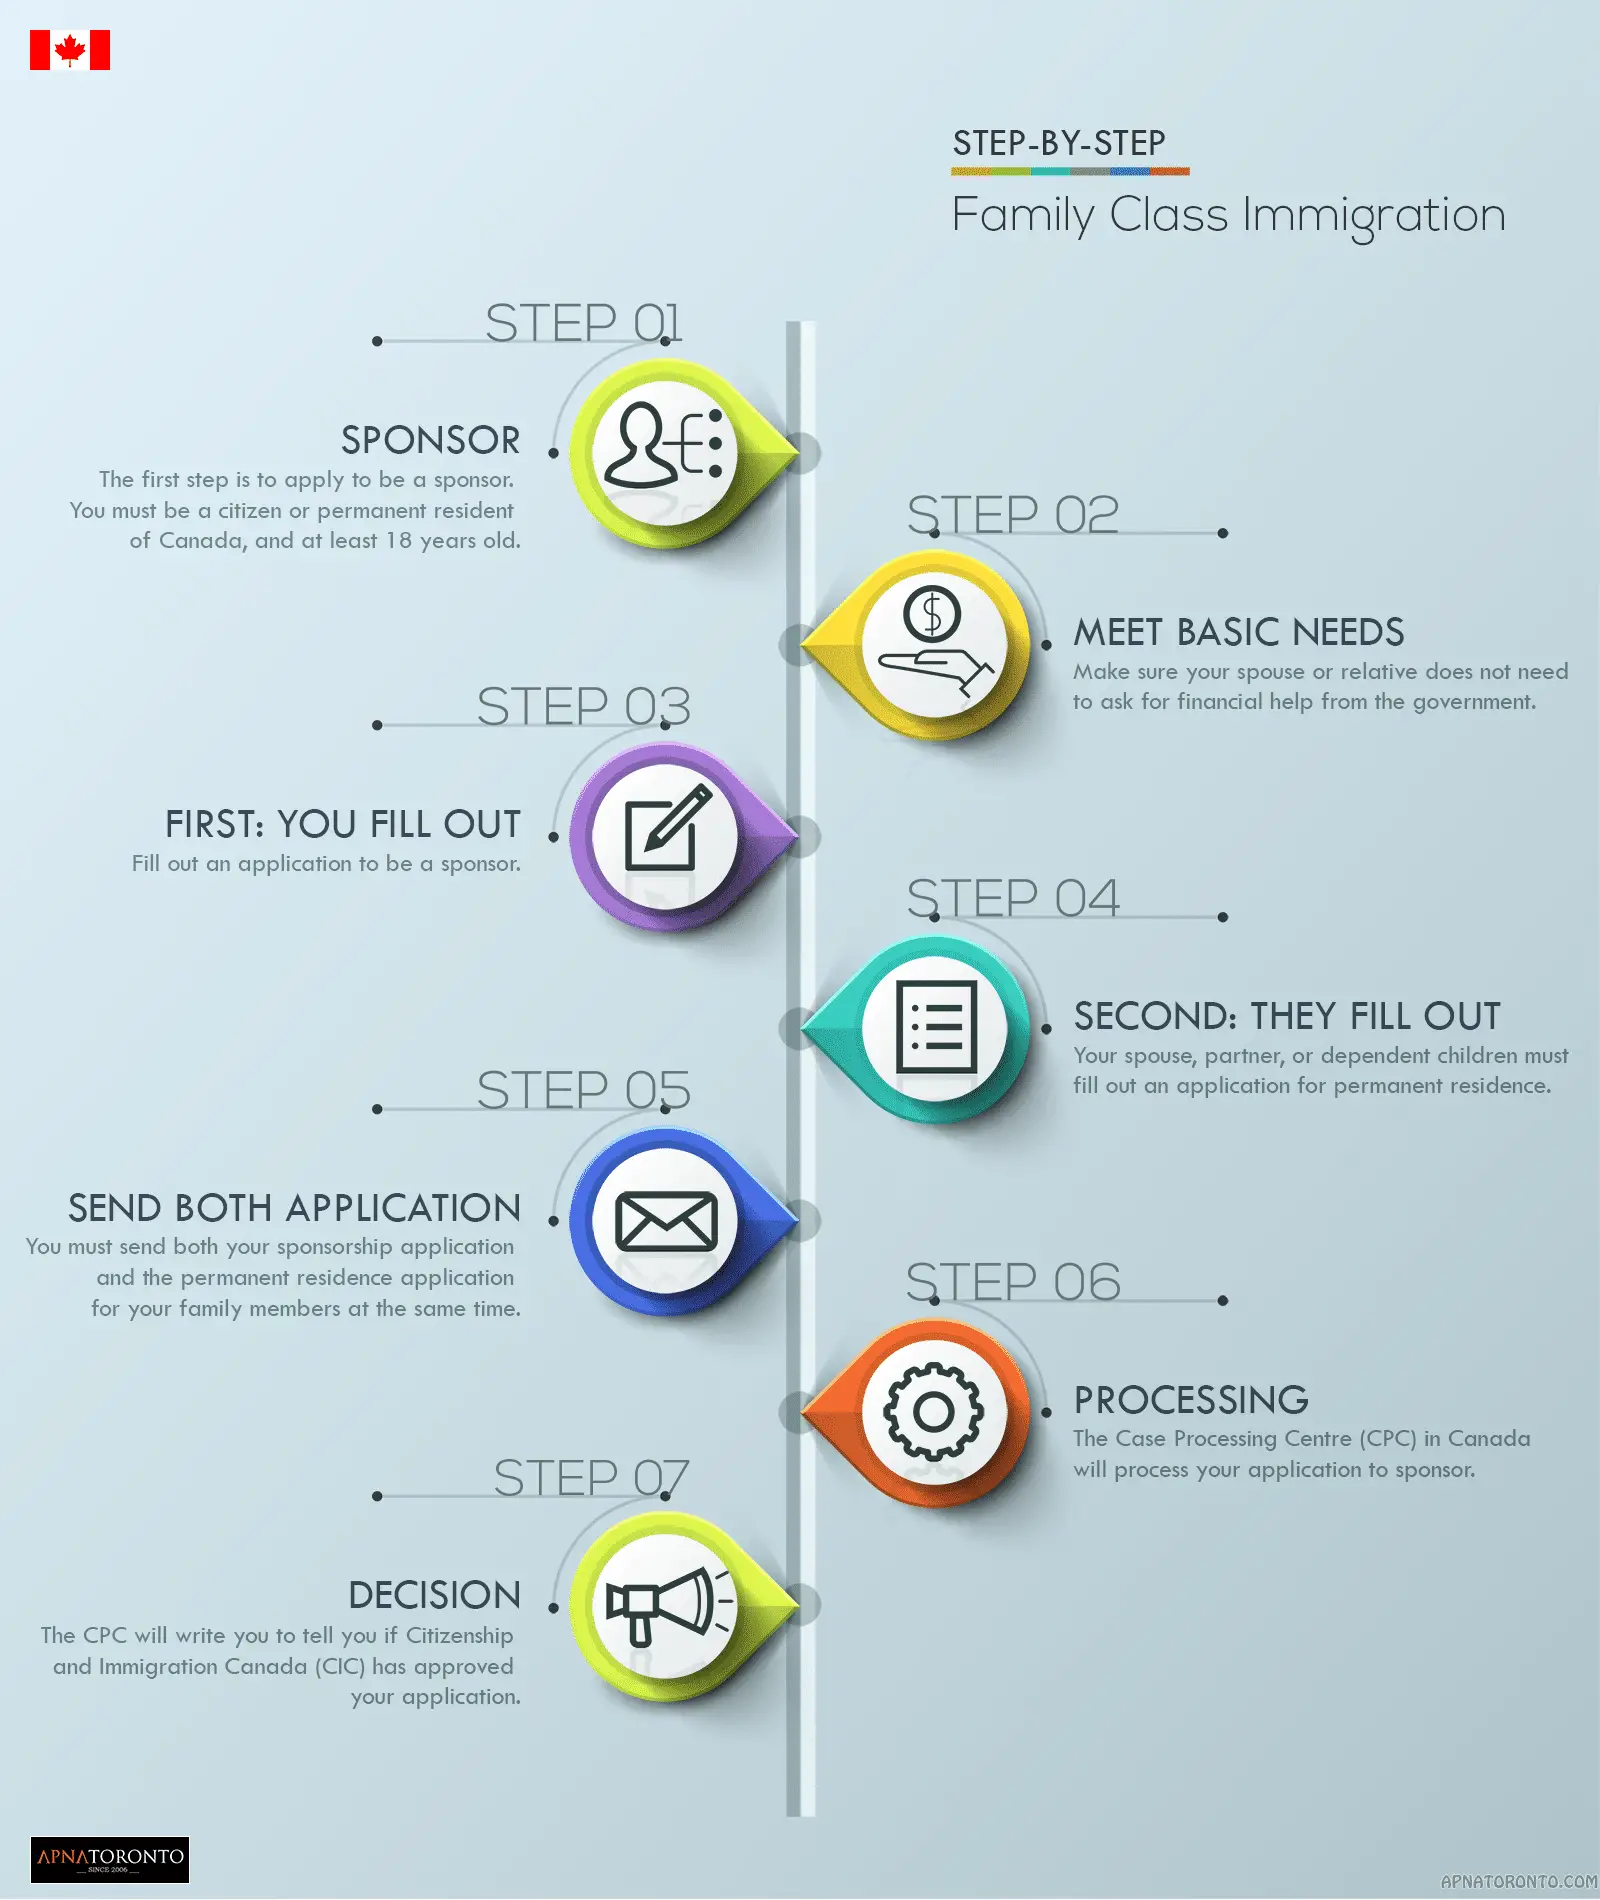 Family Class Immigration